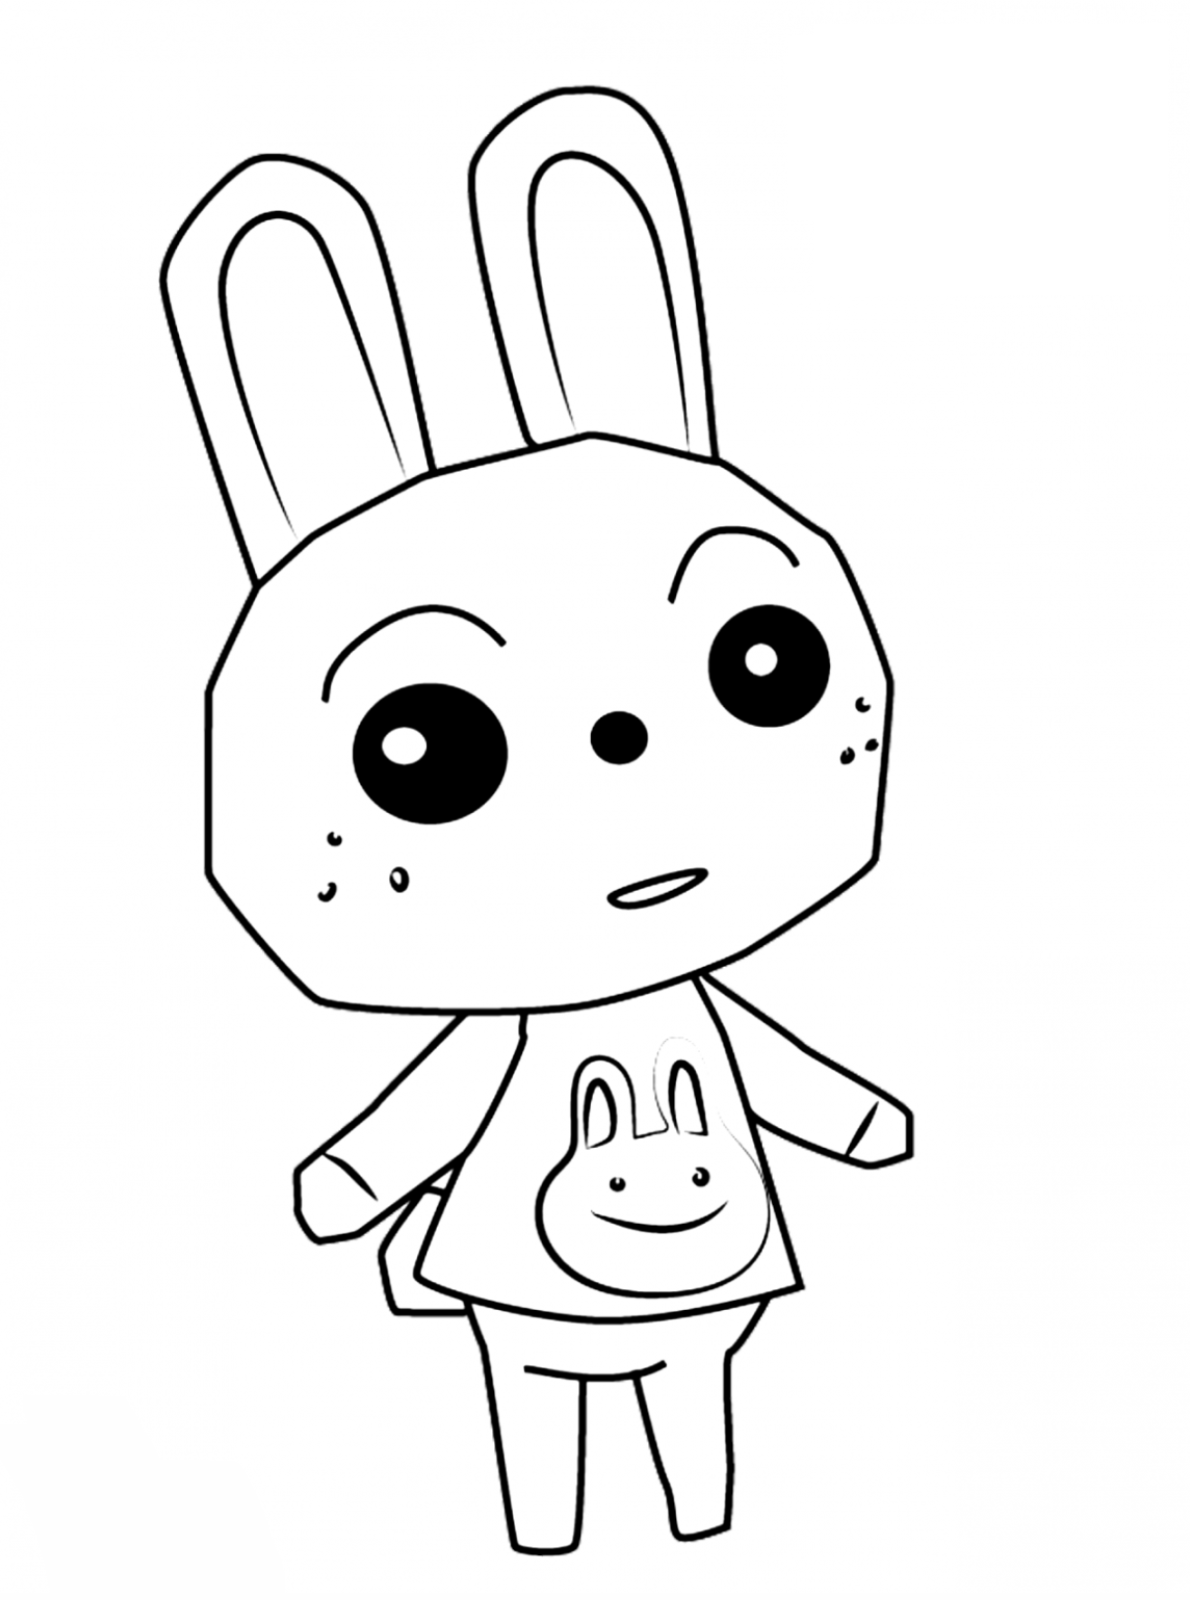 Cute Animal Crossing New Horizons Coloring Pages Pdf - Ruby peppy Animal Crossing New Horizons Coloring Pages